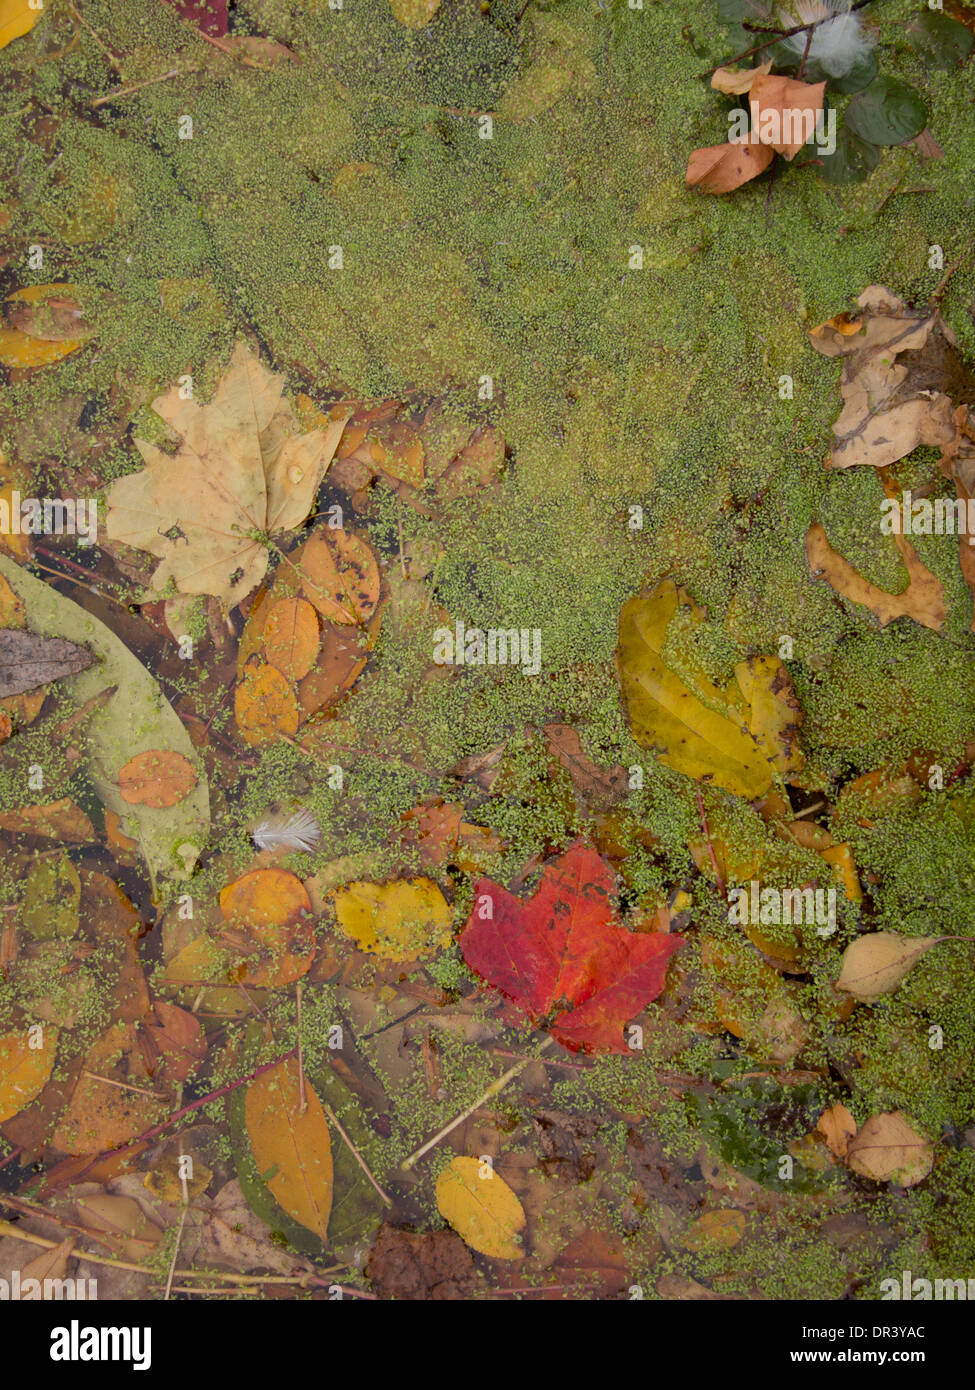 Closeup at the lake with algae and fallen leaves in the autumn in Prospect Park, Brooklyn, NY. Stock Photo